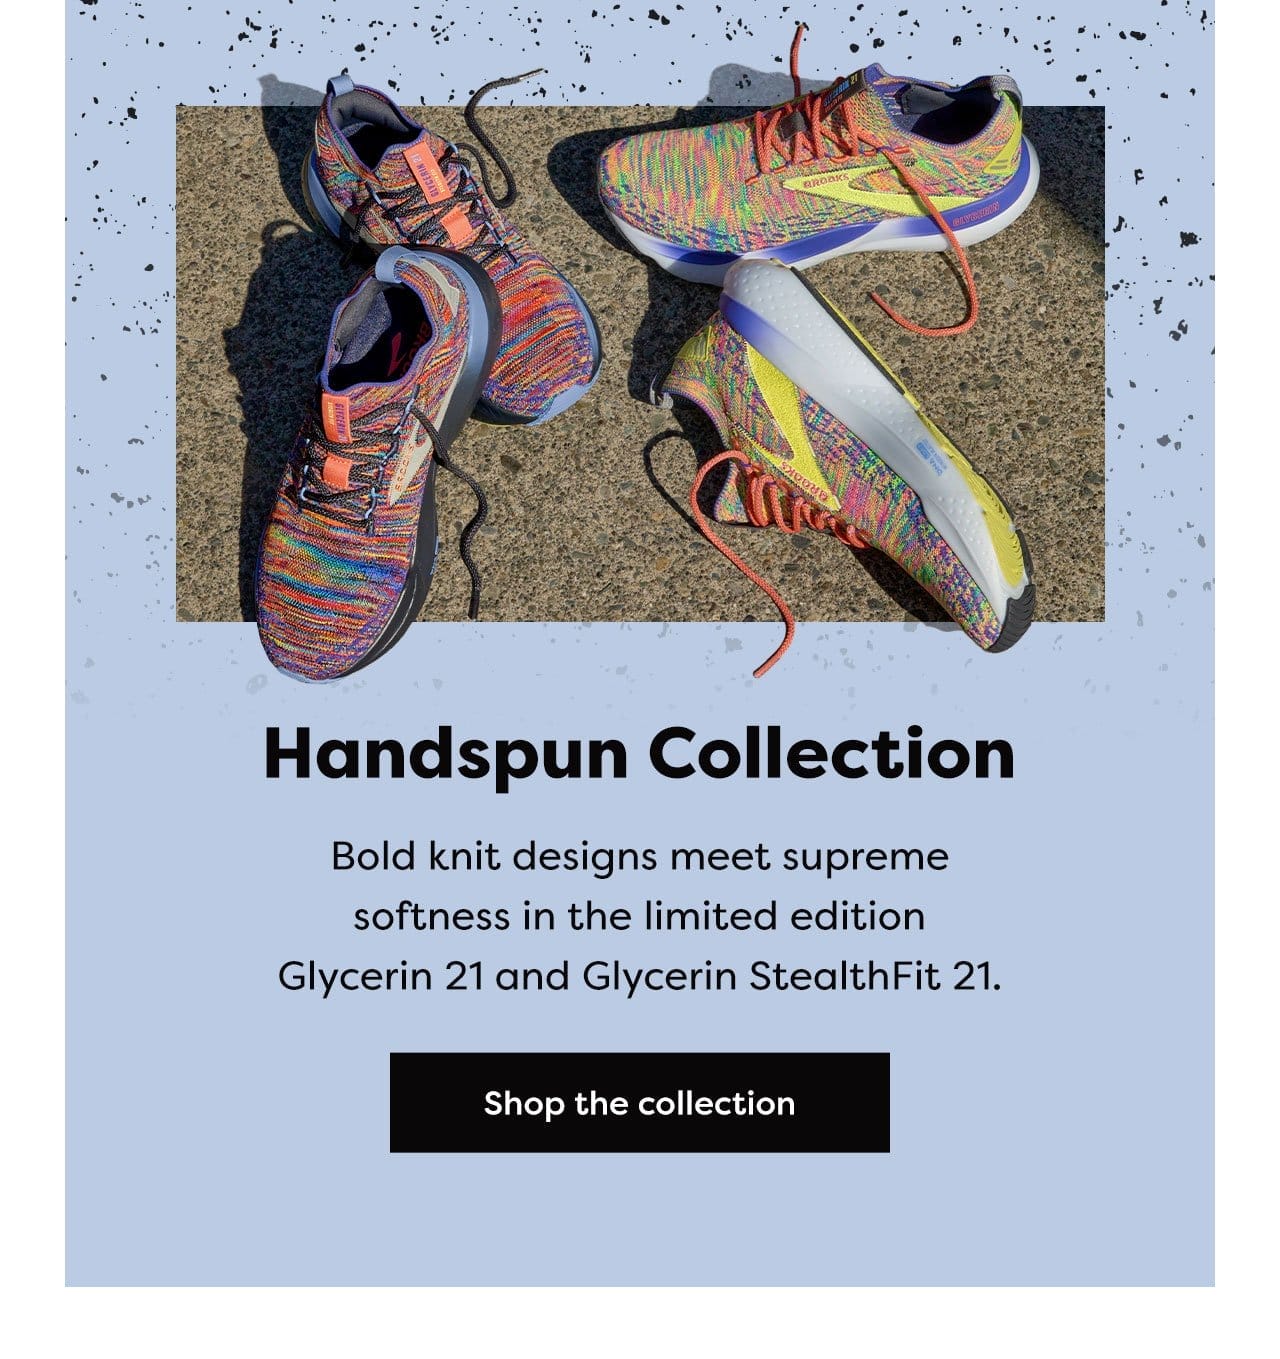 Handspun Collection | Bold knit designs meet supreme softness in the limited edition Glycerin 21 and Glycerin StealthFit 21. | Shop the collection